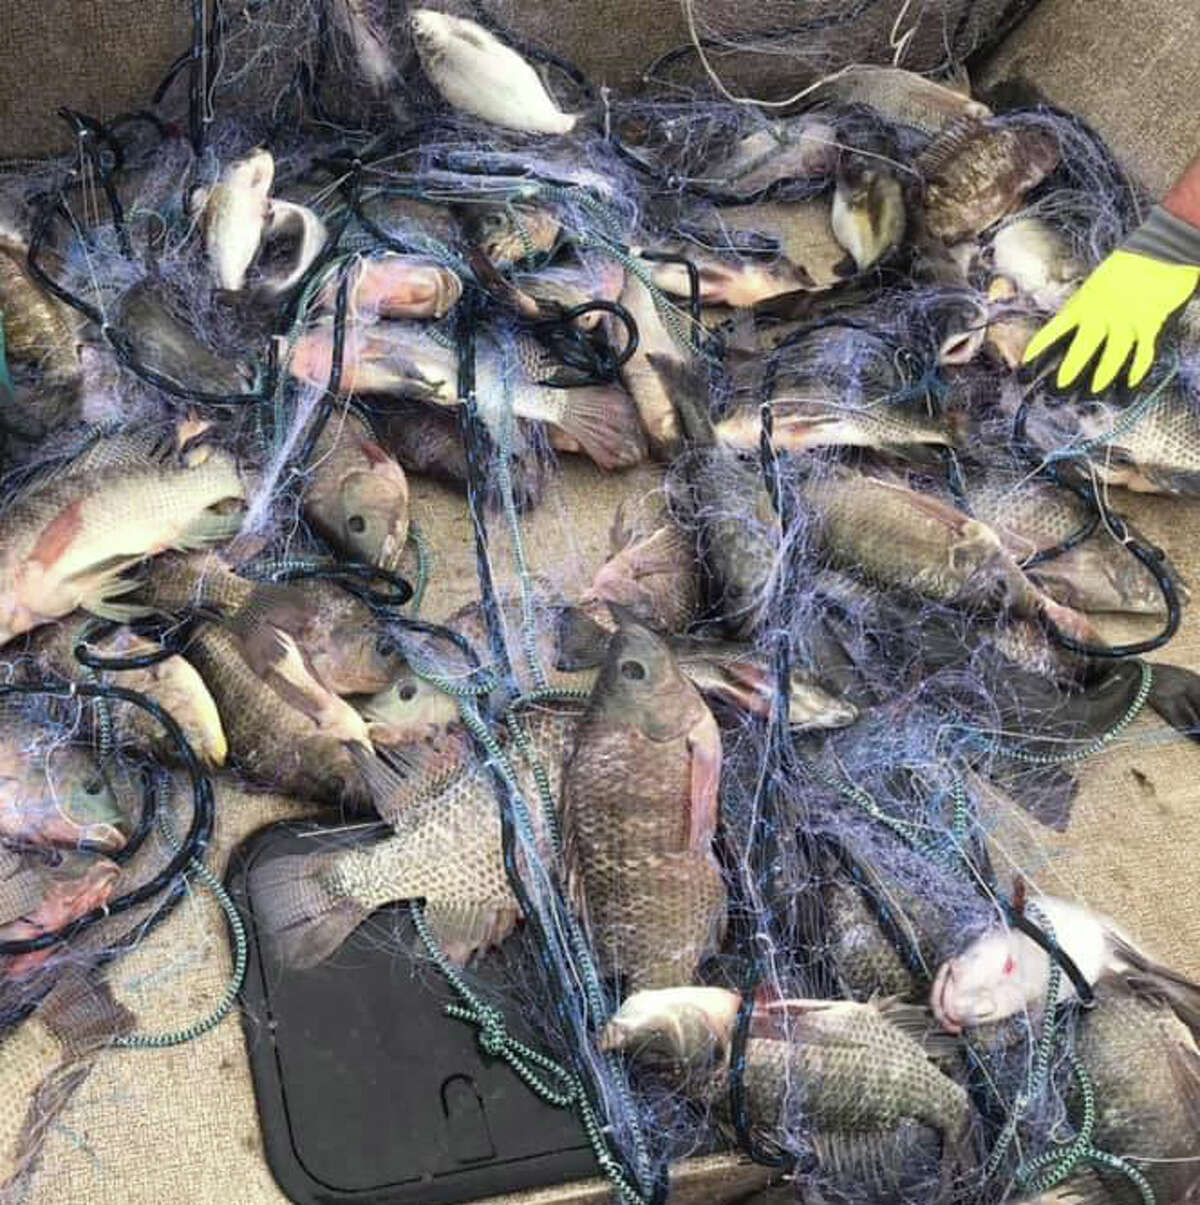 The Texas Parks and Wildlife Department is asking anyone who reels in tilapia at two San Antonio lakes to not return it to the water. MORE PHOTOS: Check out some of the other unwanted species currently invading Texas...